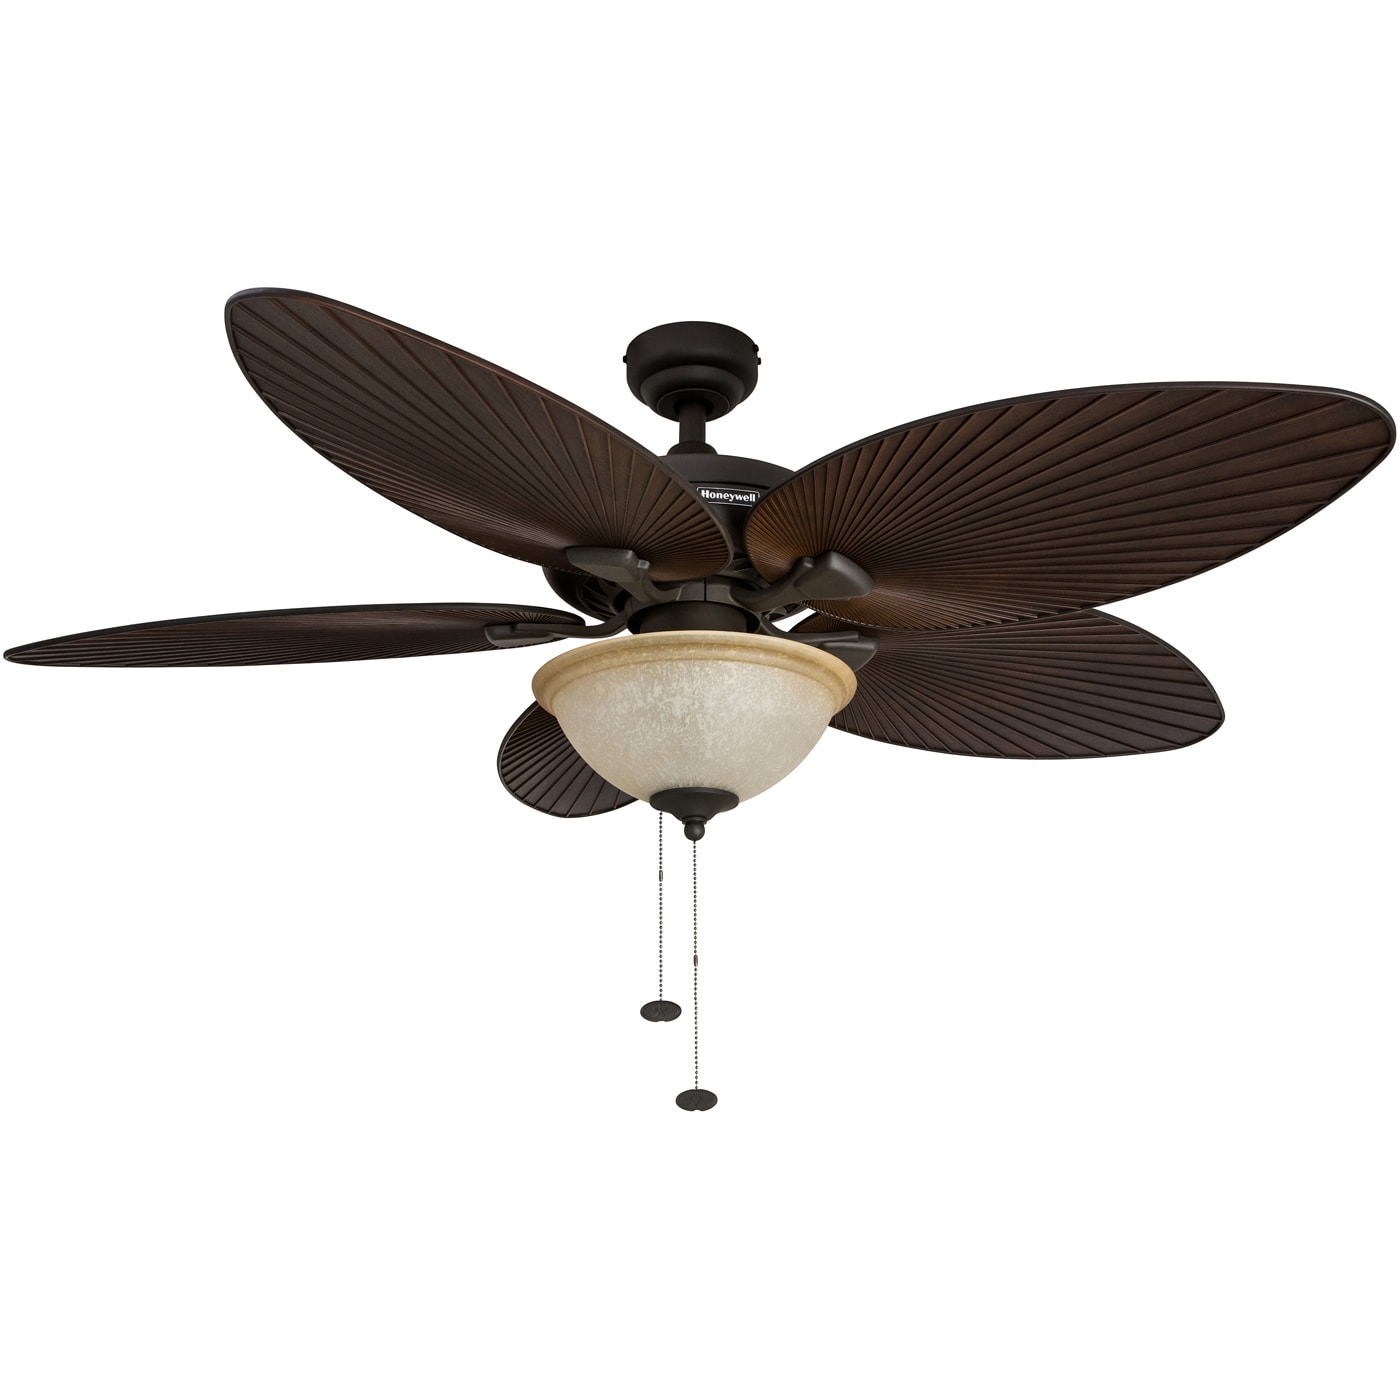 Honeywell Palm Island 52-in Bronze LED Indoor/Outdoor Ceiling Fan with  Light (5-Blade)